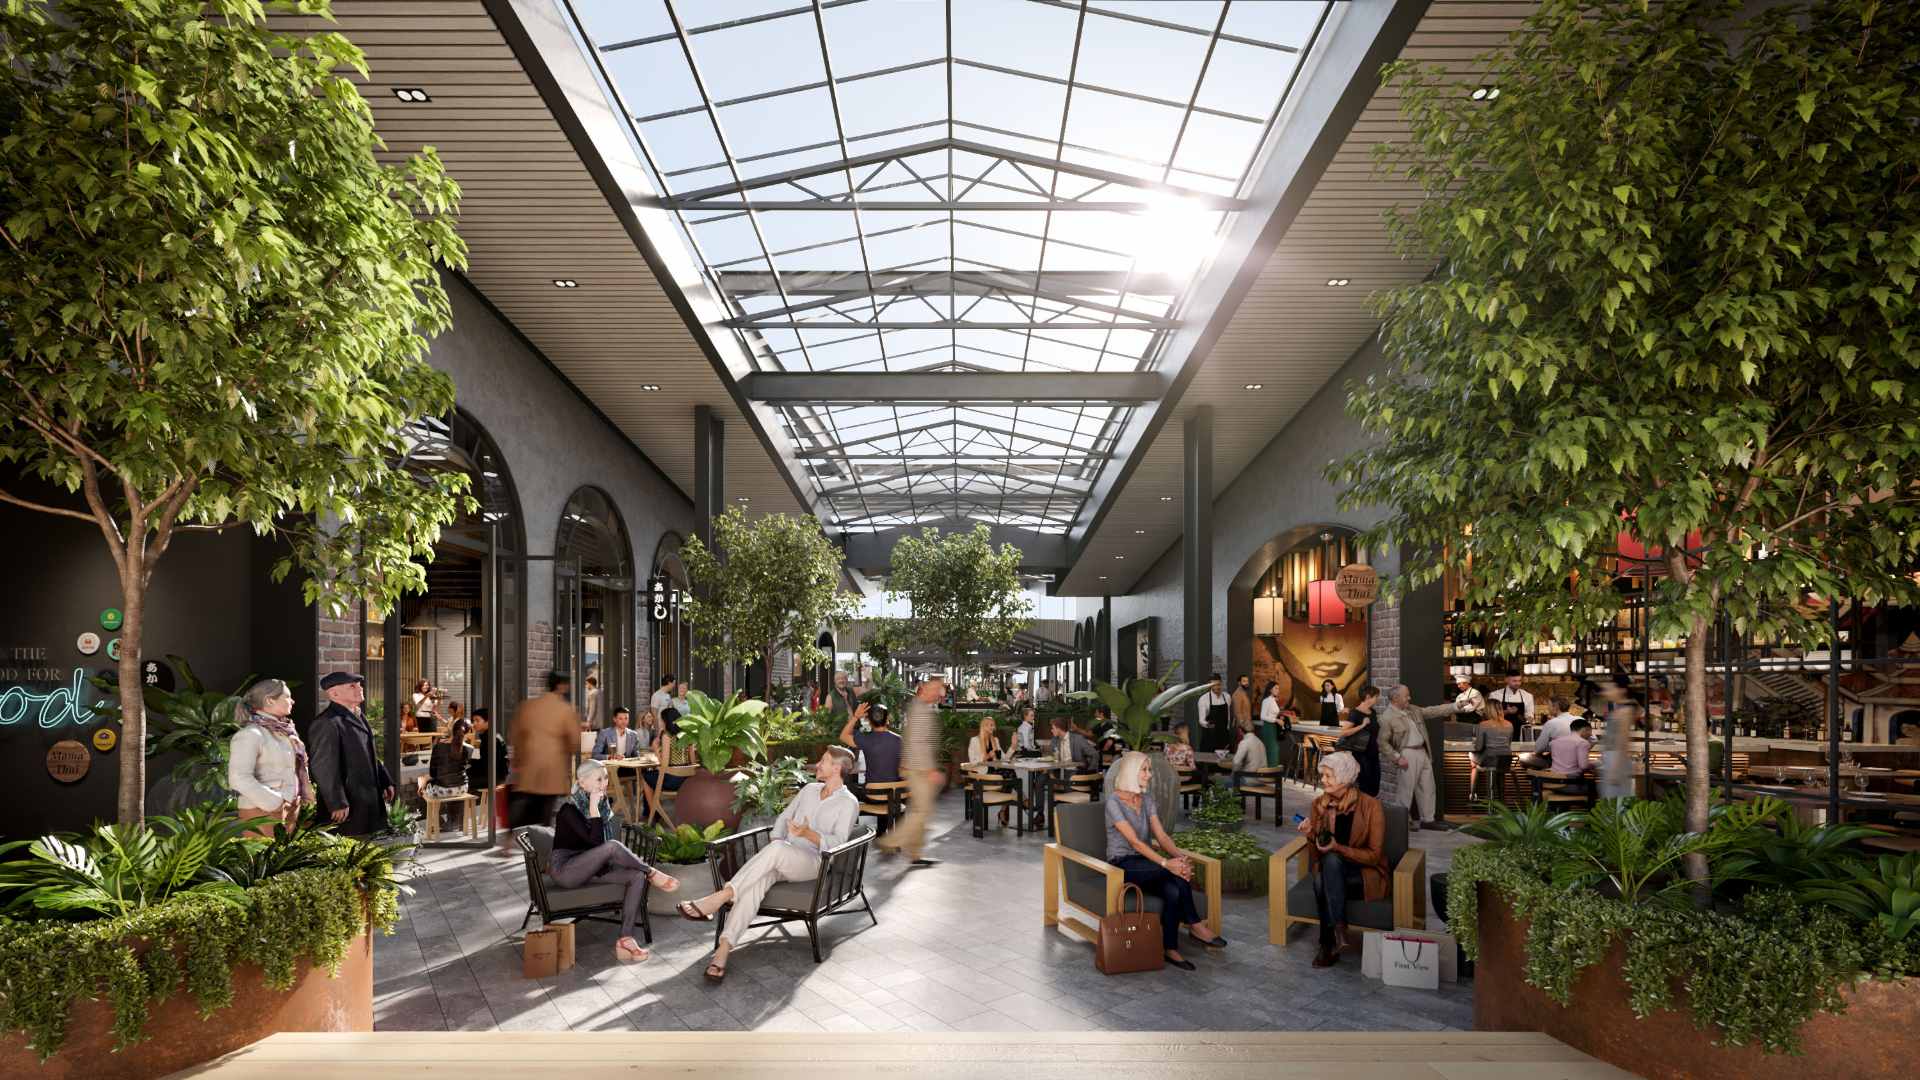 Westfield Doncaster Is Getting a $30-Million Rooftop Food Precinct with a DIY Okonomiyaki Joint